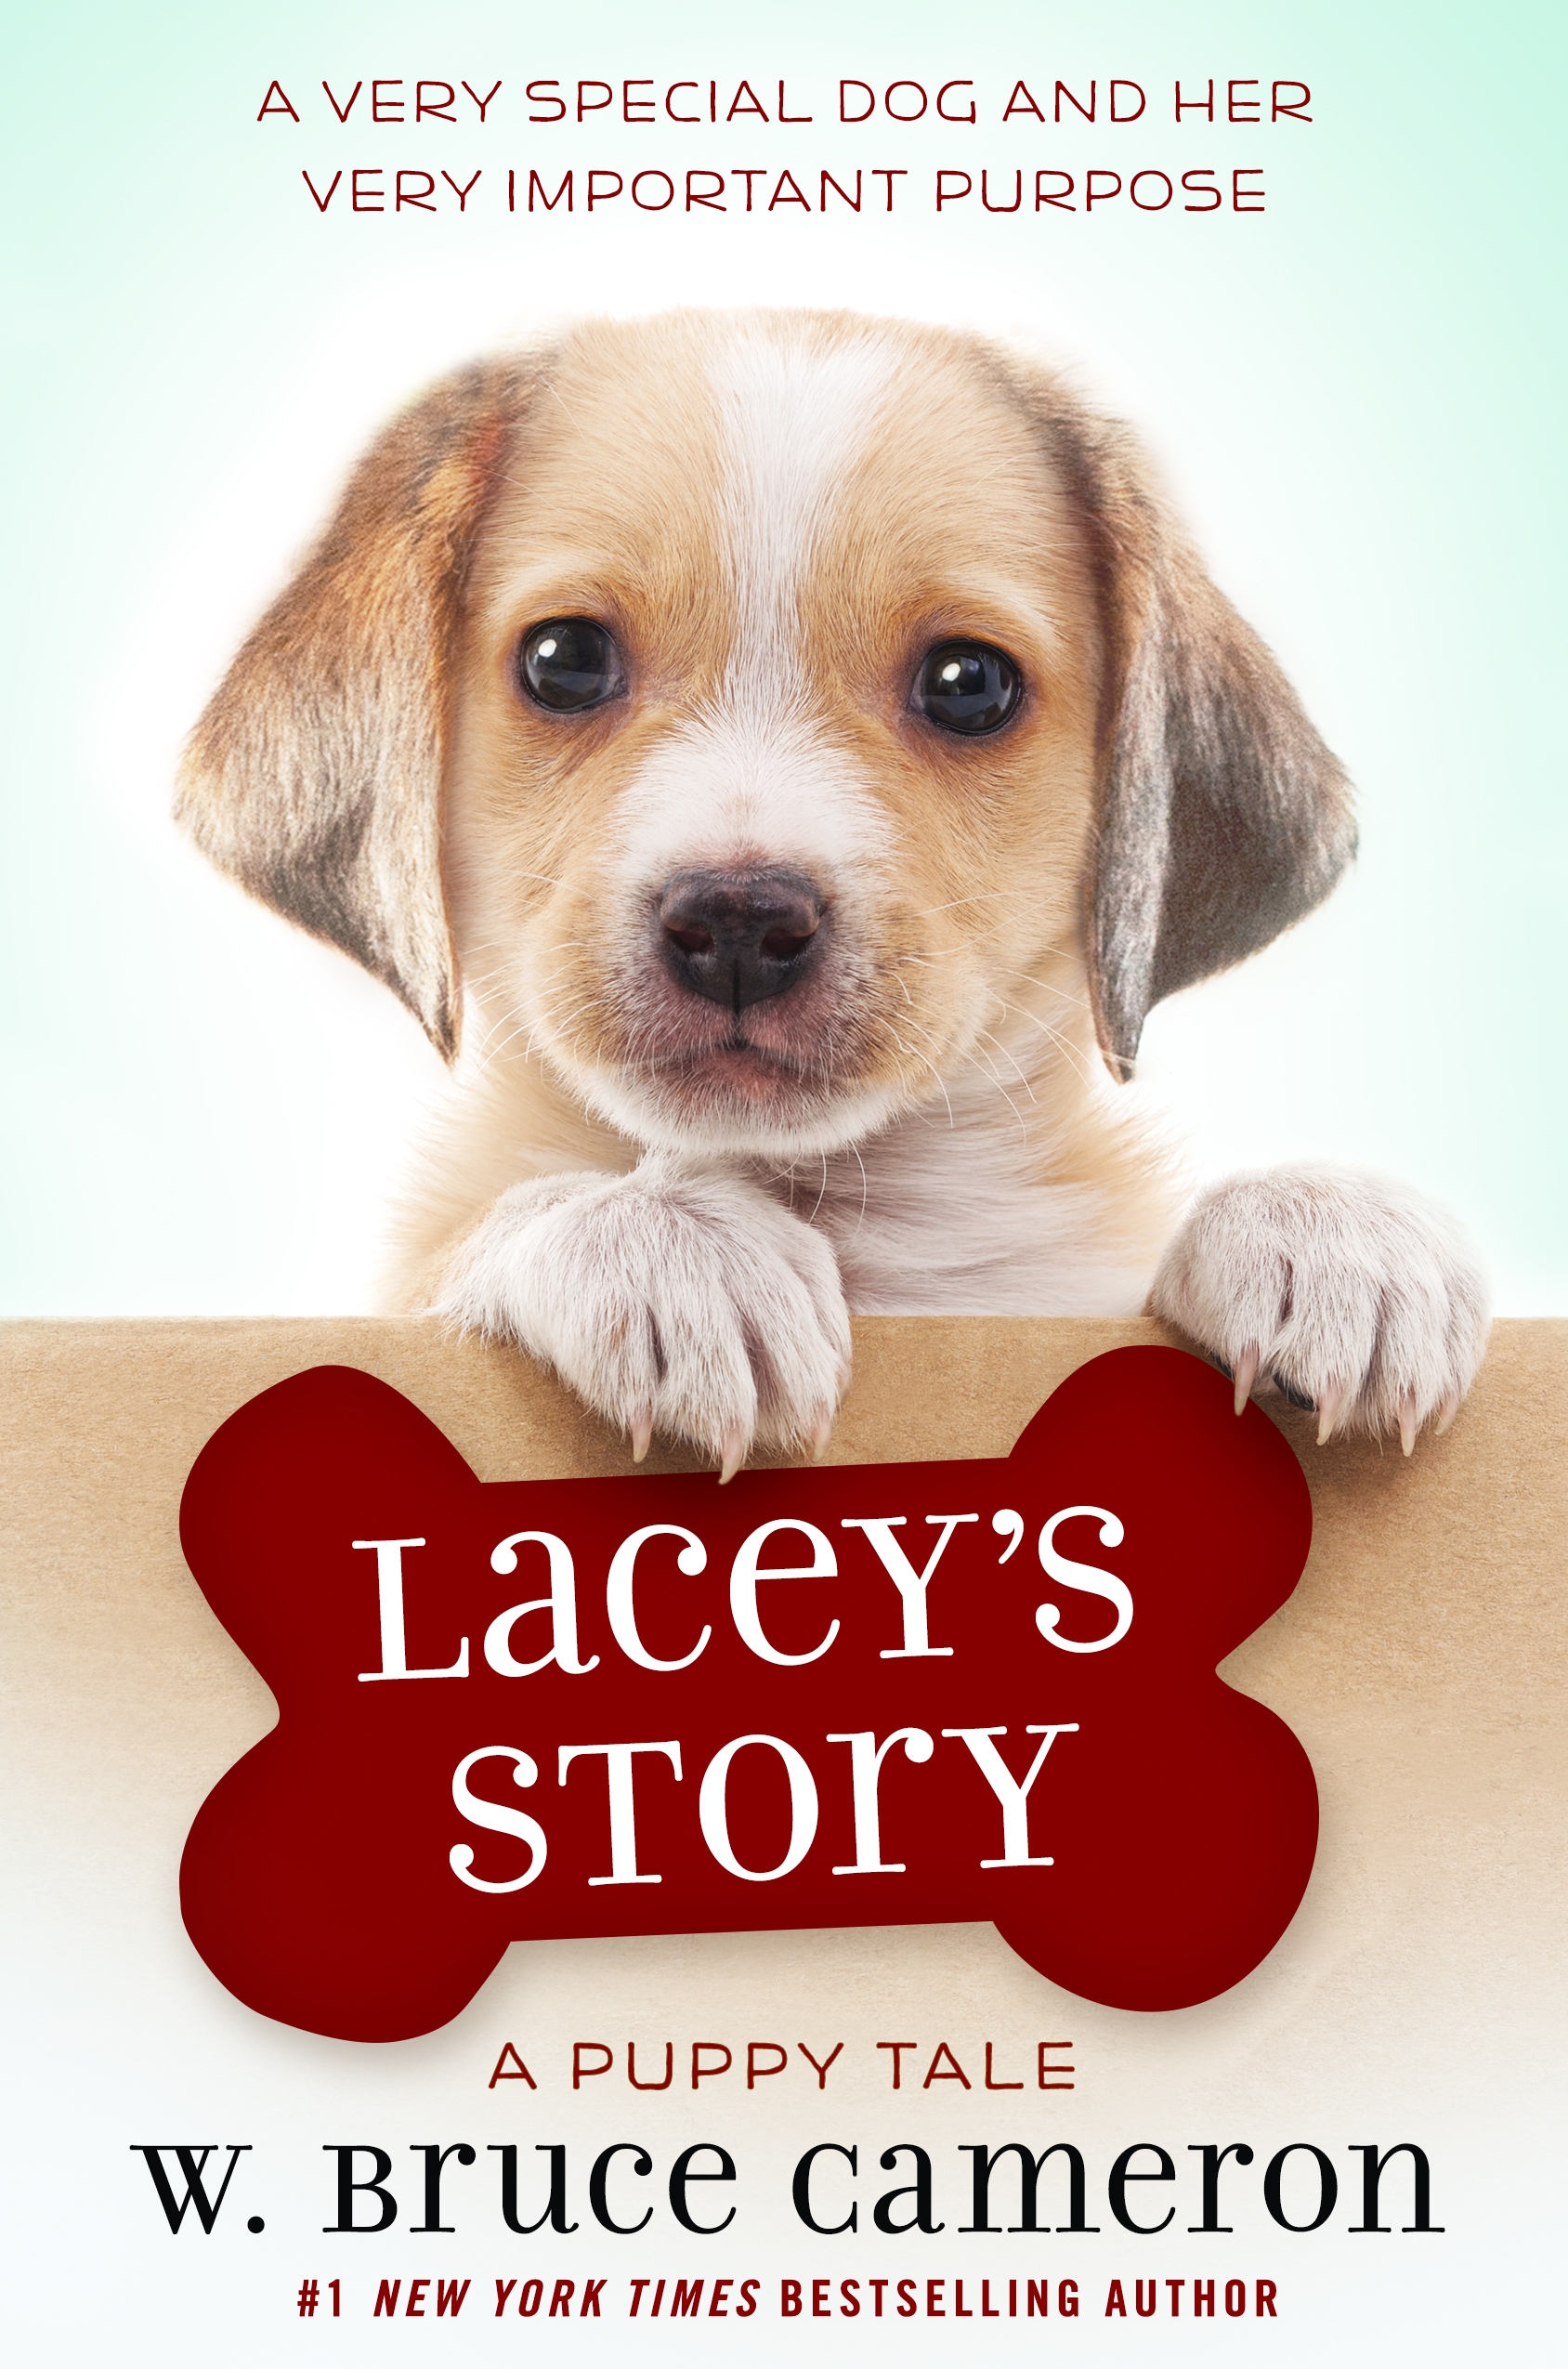 Lacey's Story : A Puppy Tale by W. Bruce Cameron